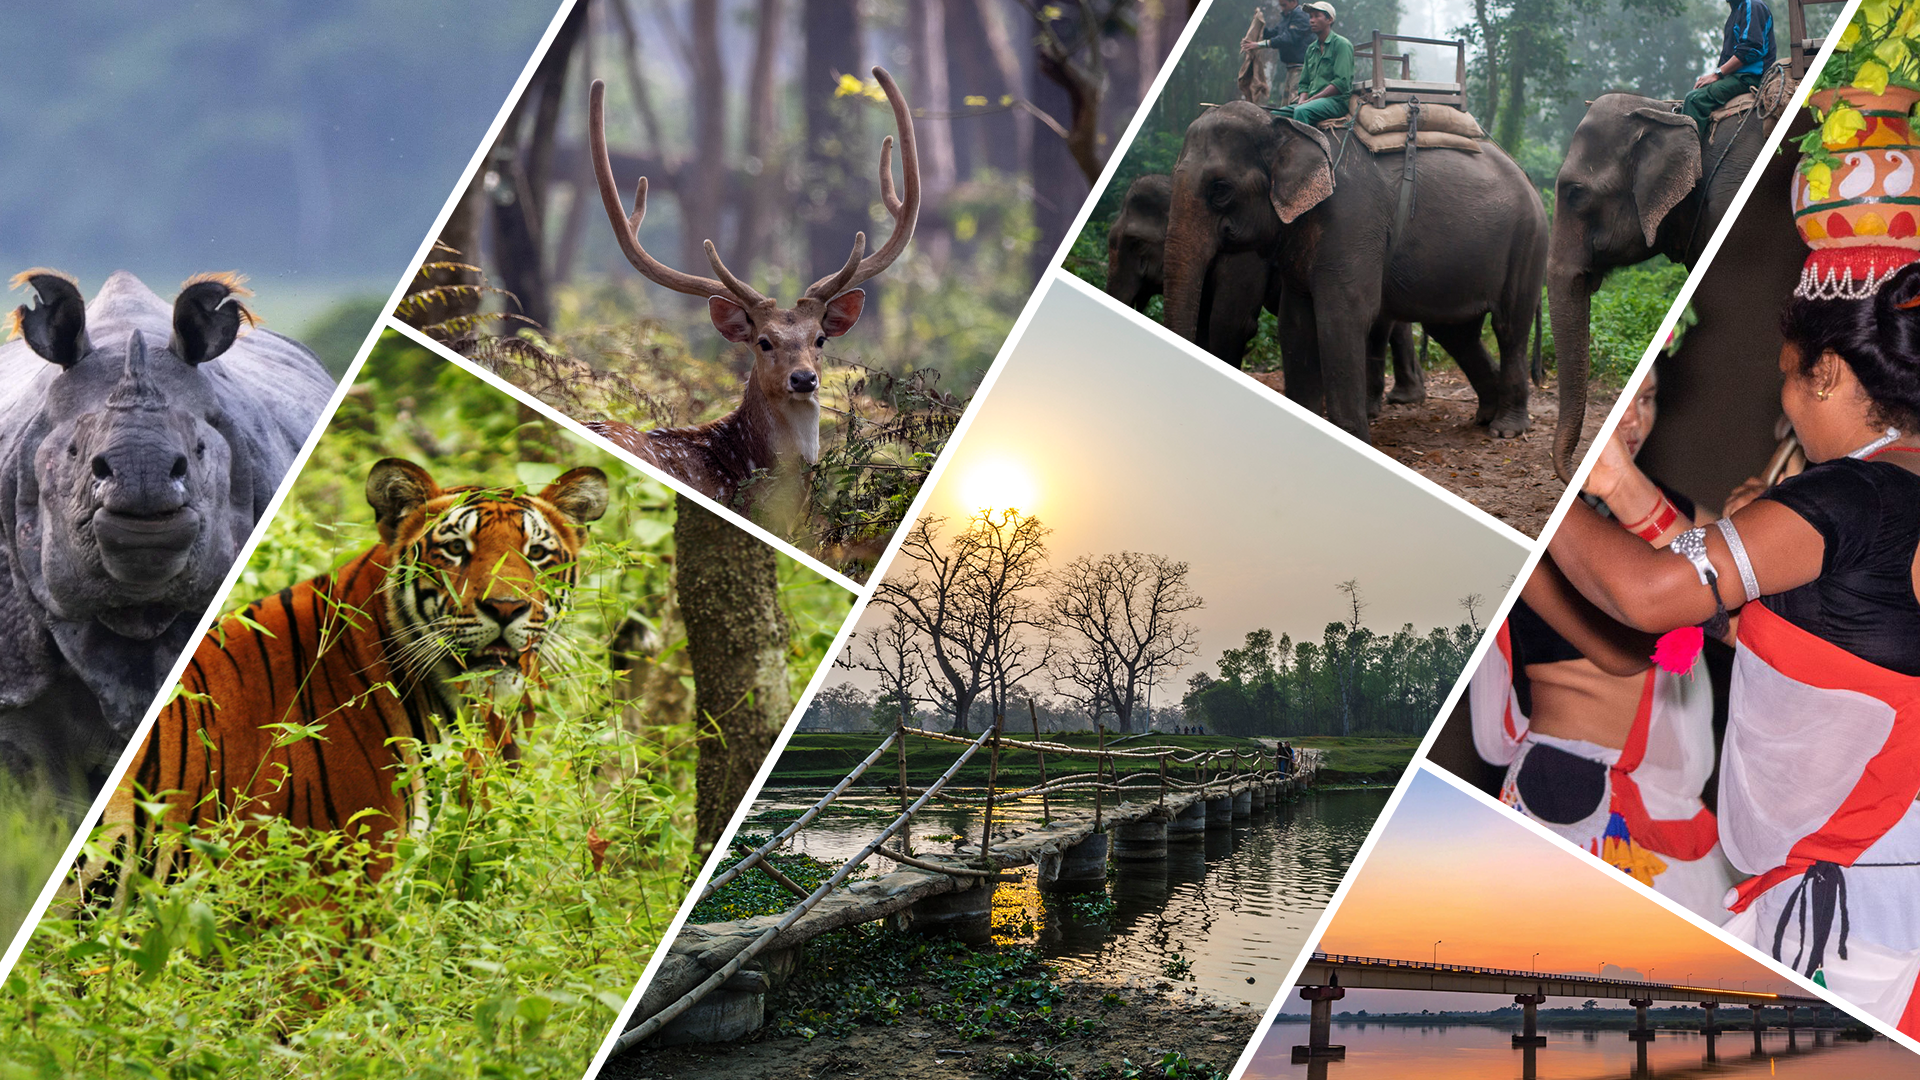 Stay visit Chitwan featured image